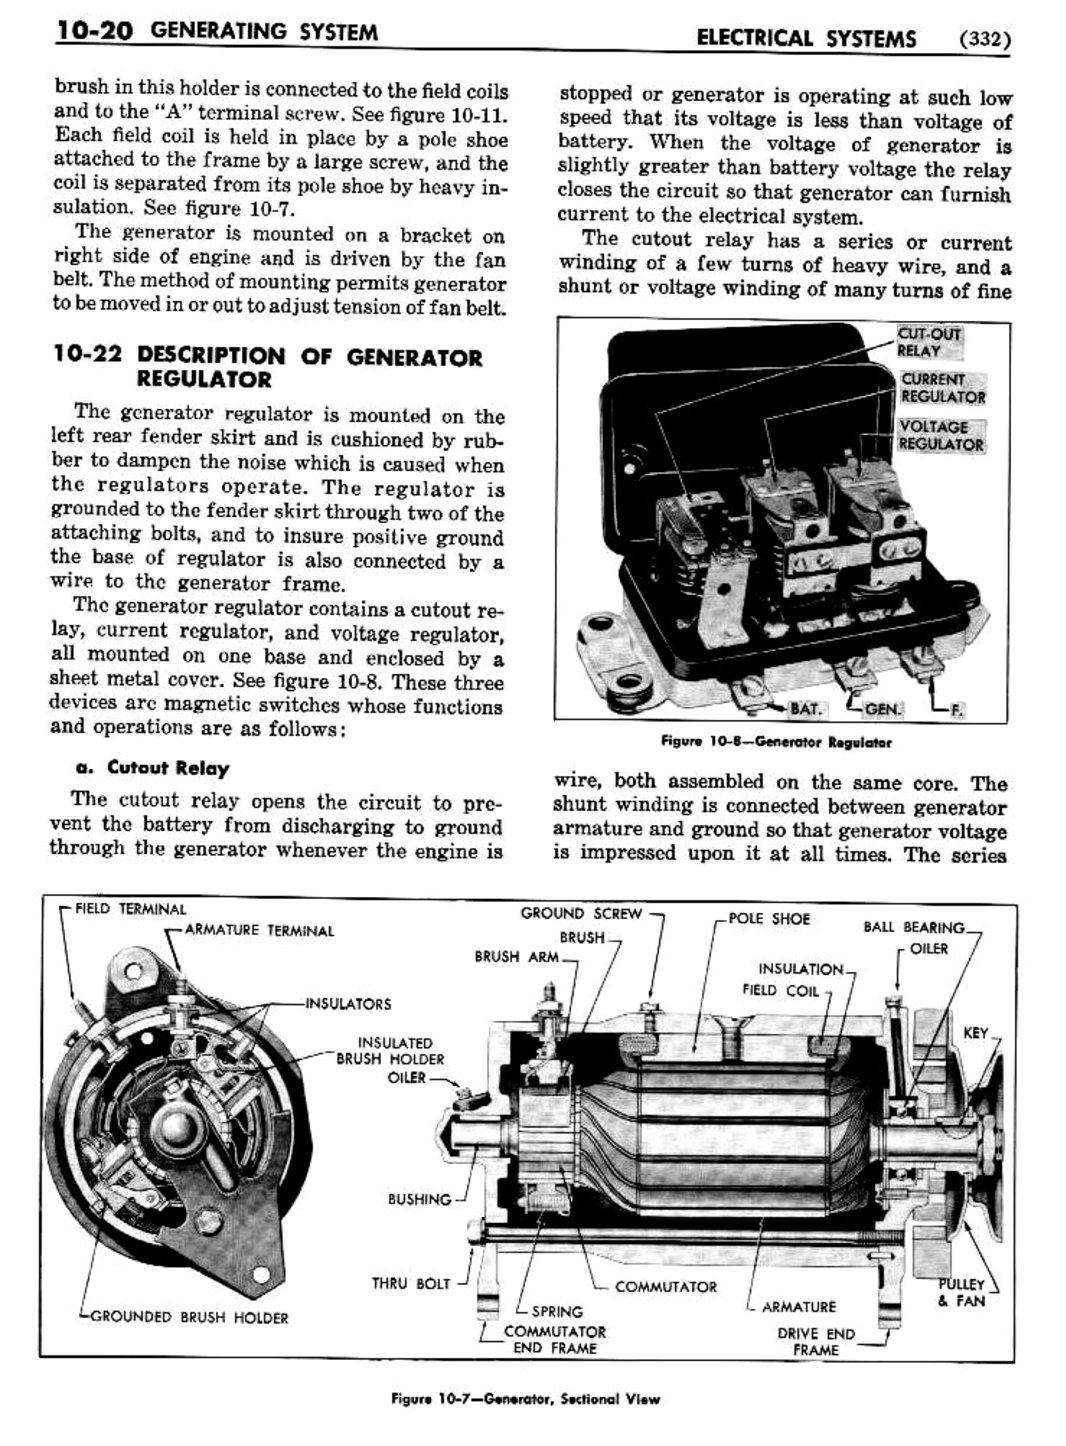 n_11 1954 Buick Shop Manual - Electrical Systems-020-020.jpg